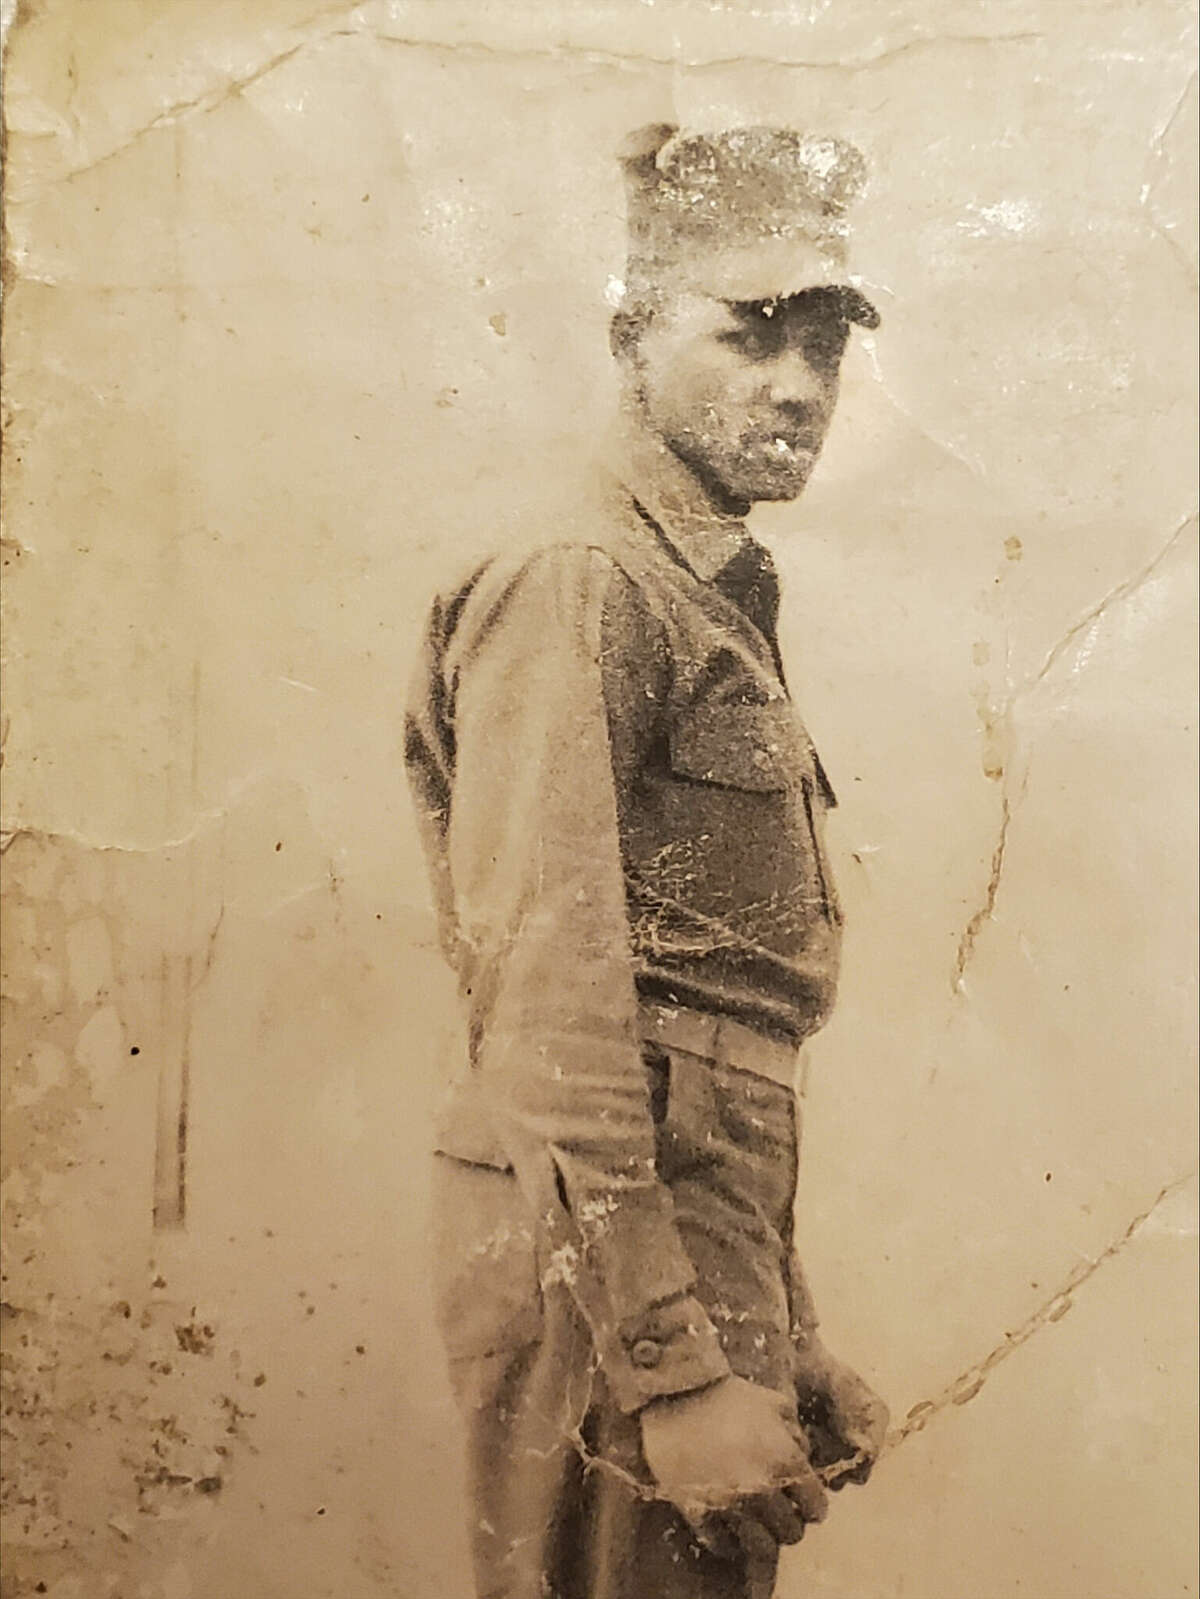 Hamden resident Conley Monk Jr. in his uniform while serving in the U.S. Marines from 1968 to 1970. 